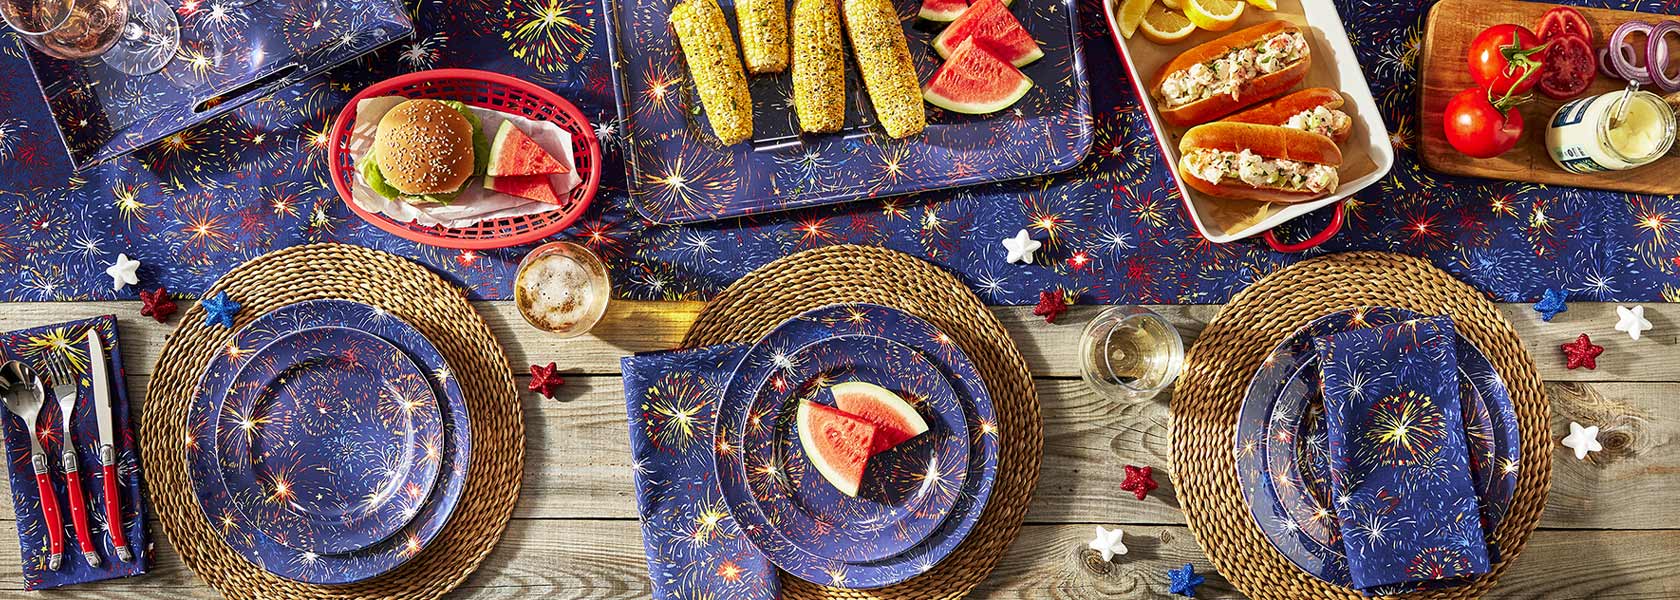 Melamine outdoor dinnerware and linens with fireworks motif